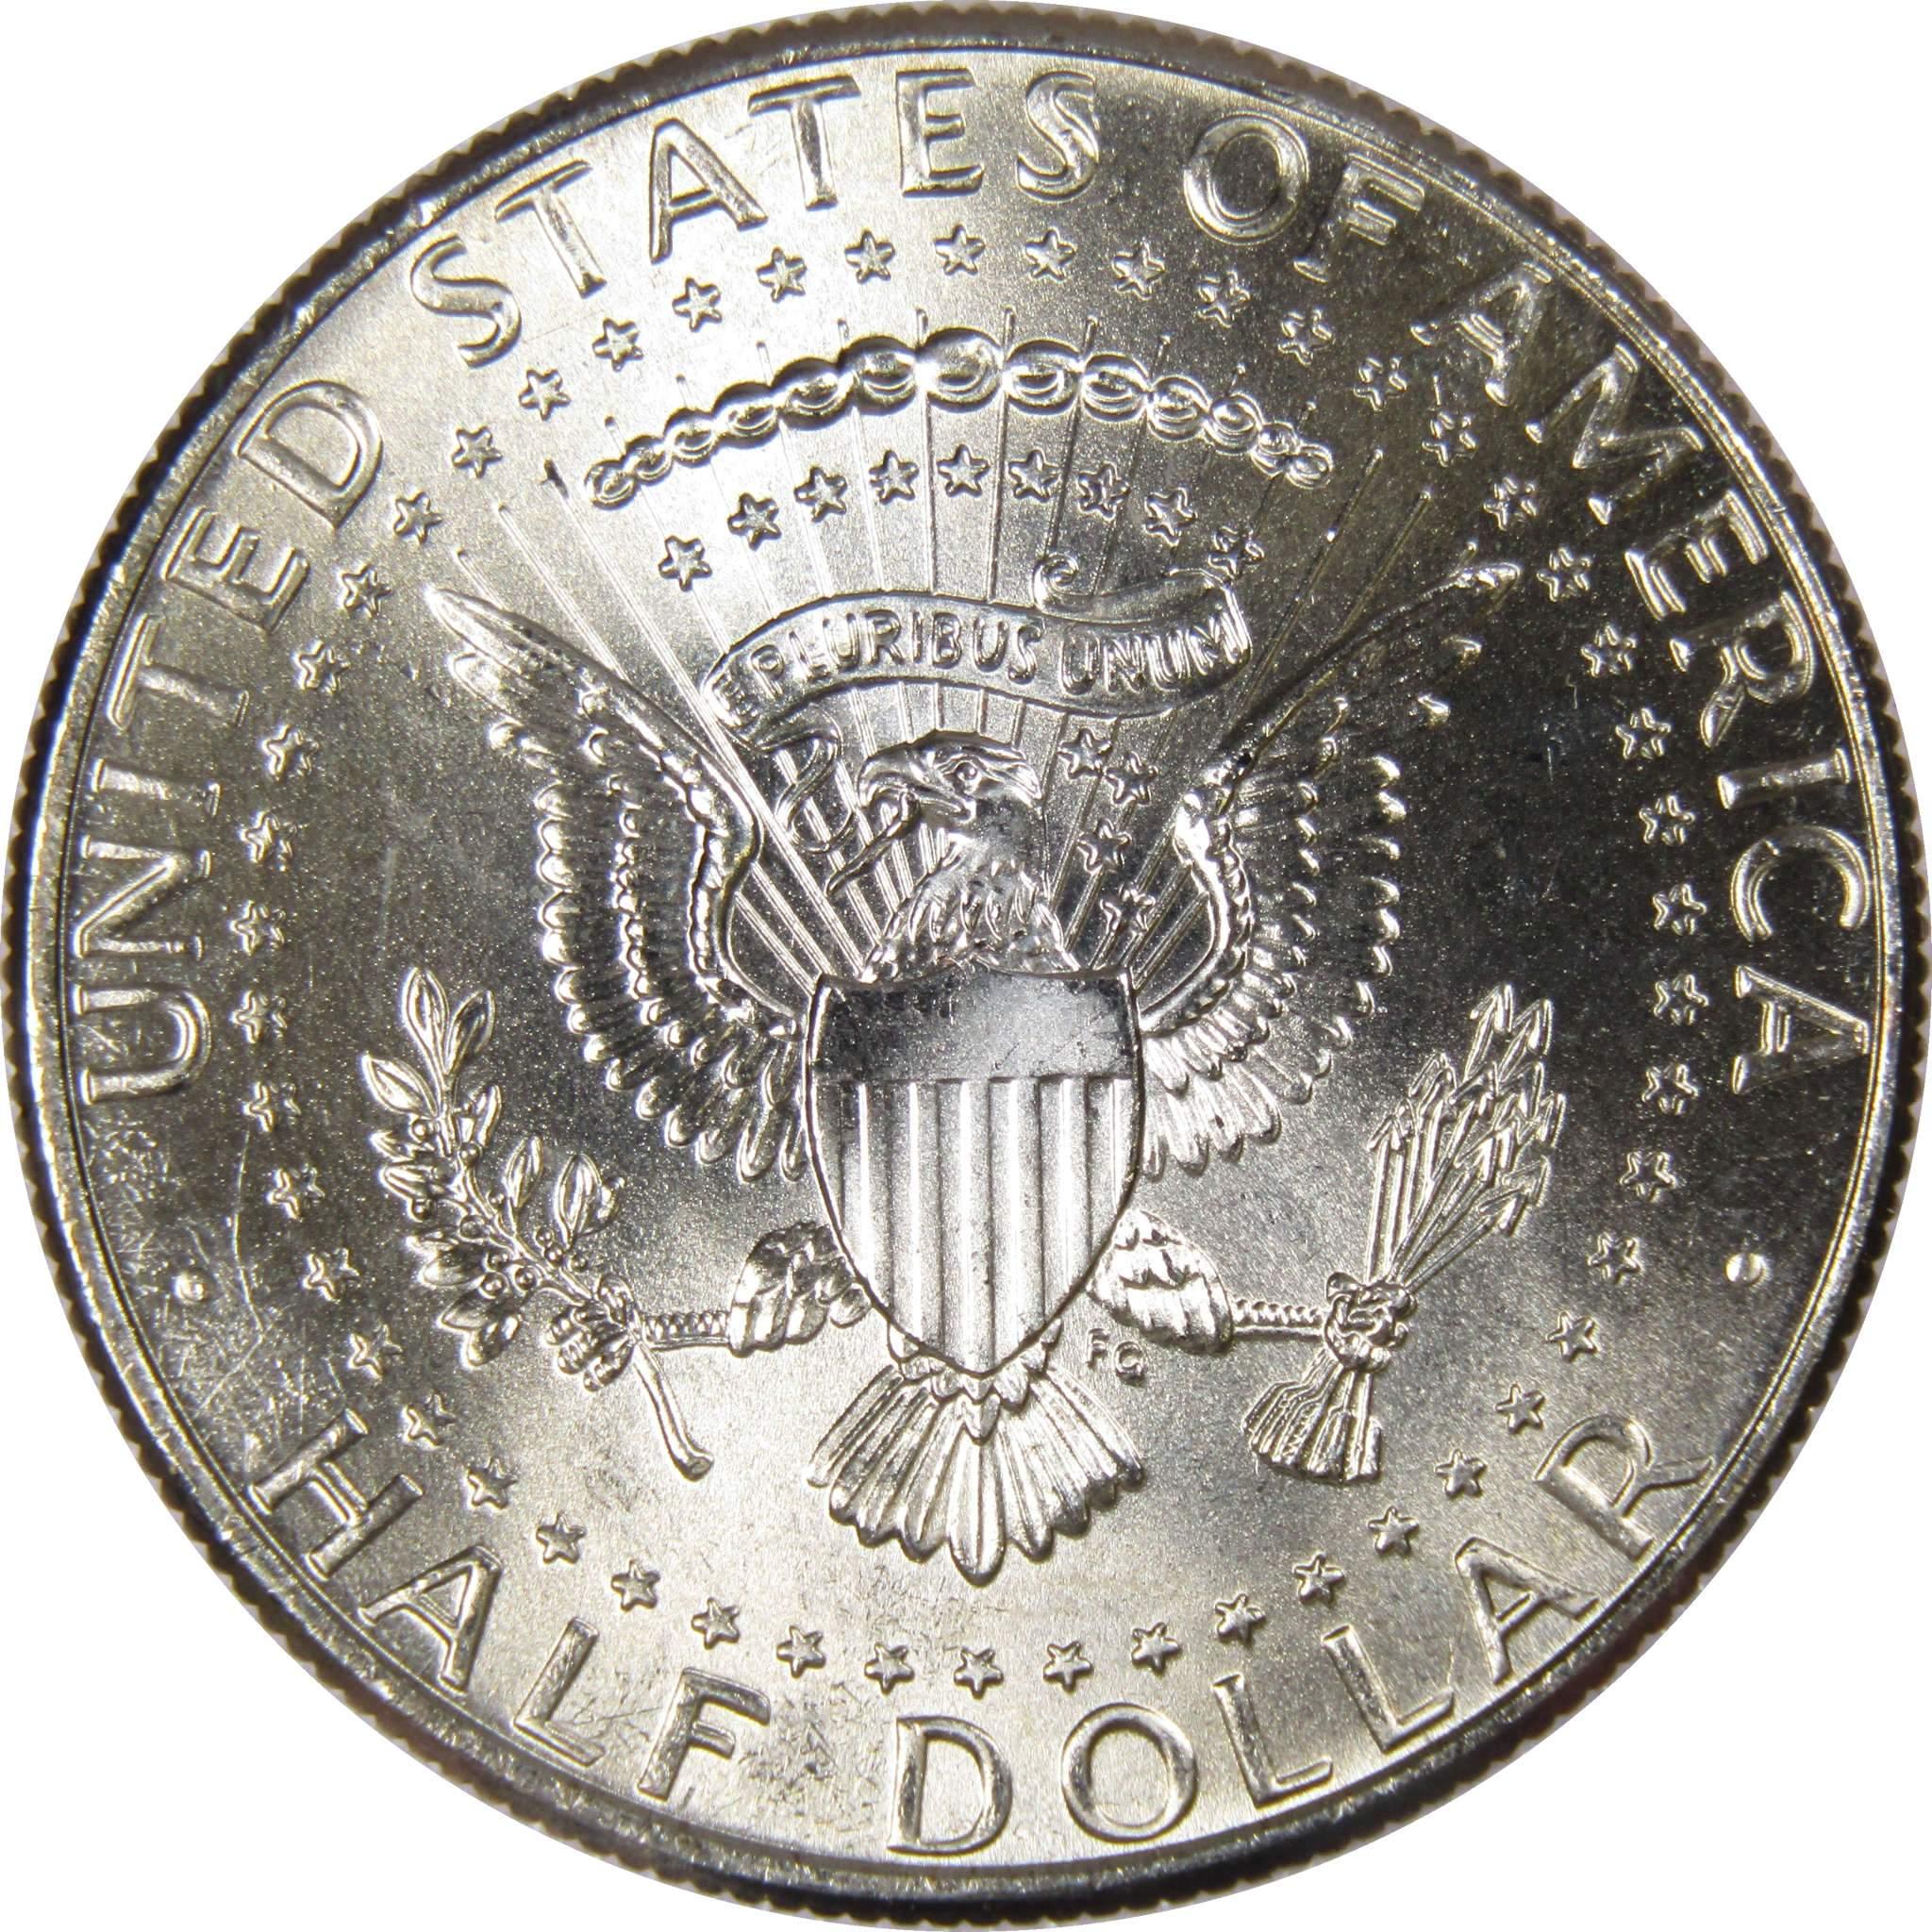 2010 P Kennedy Half Dollar BU Uncirculated Mint State 50c US Coin Collectible